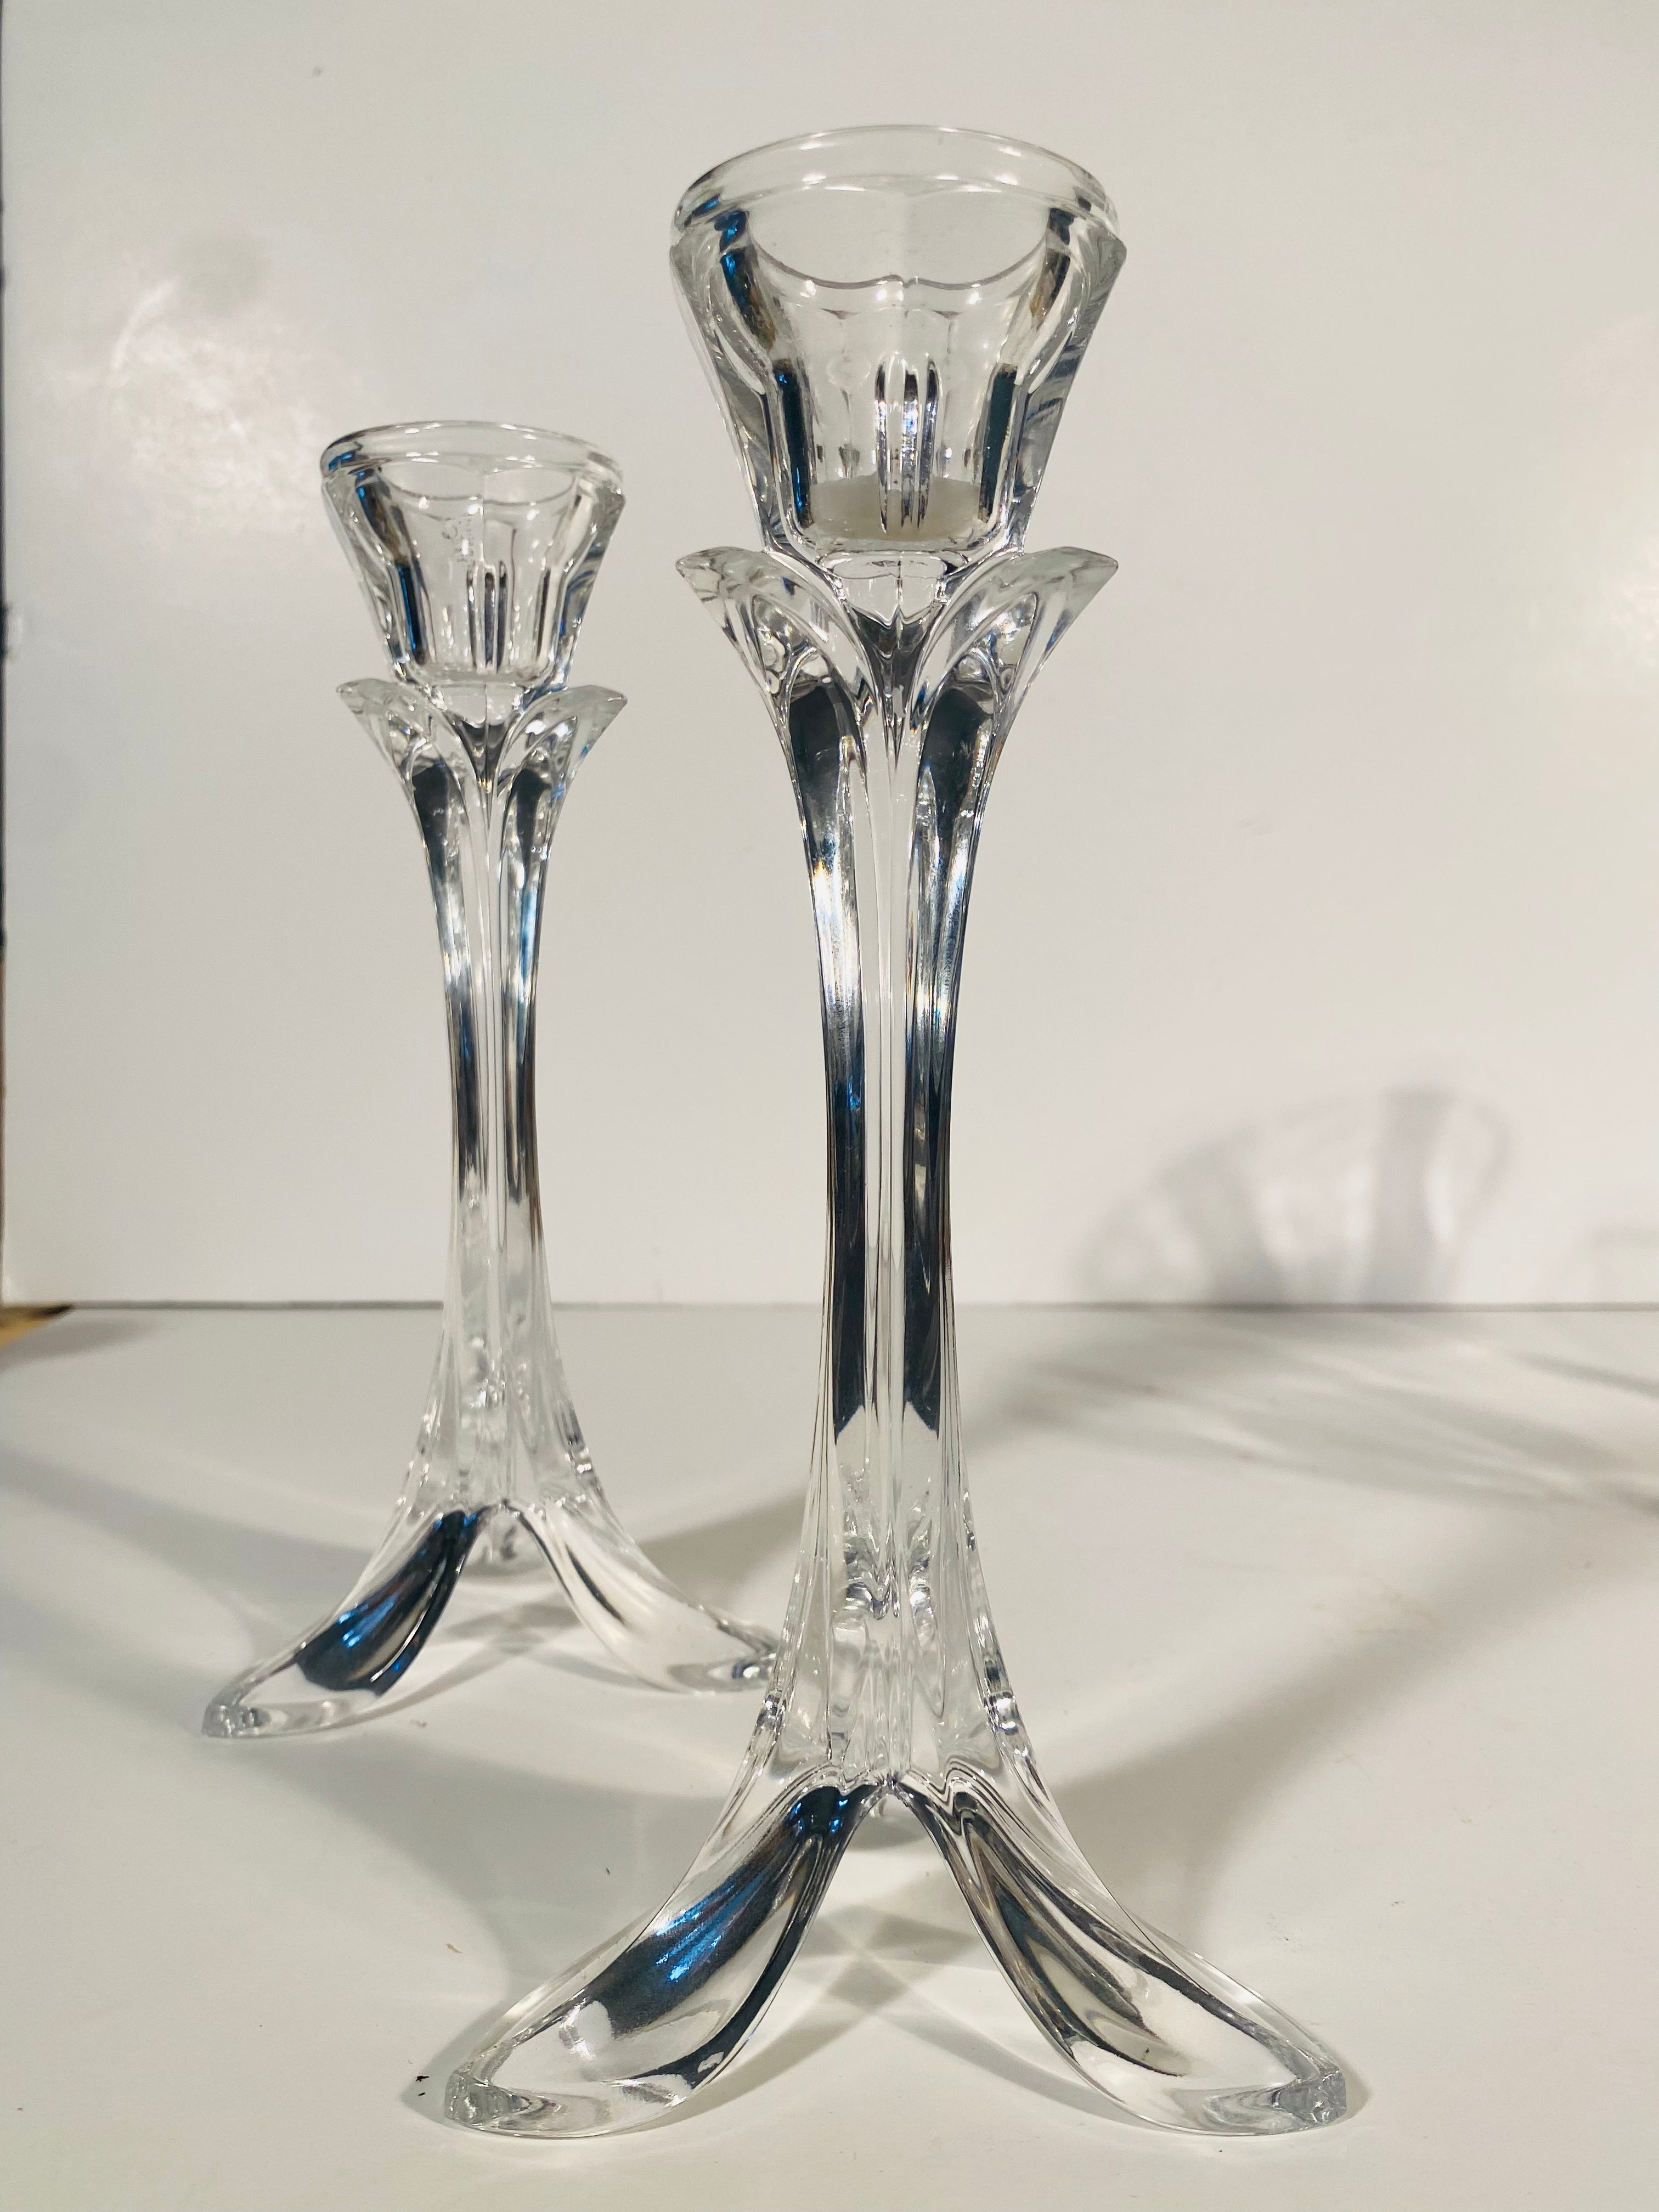 A Pair of Bandol Crystal Candlesticks by Cristal D'Arques Durand